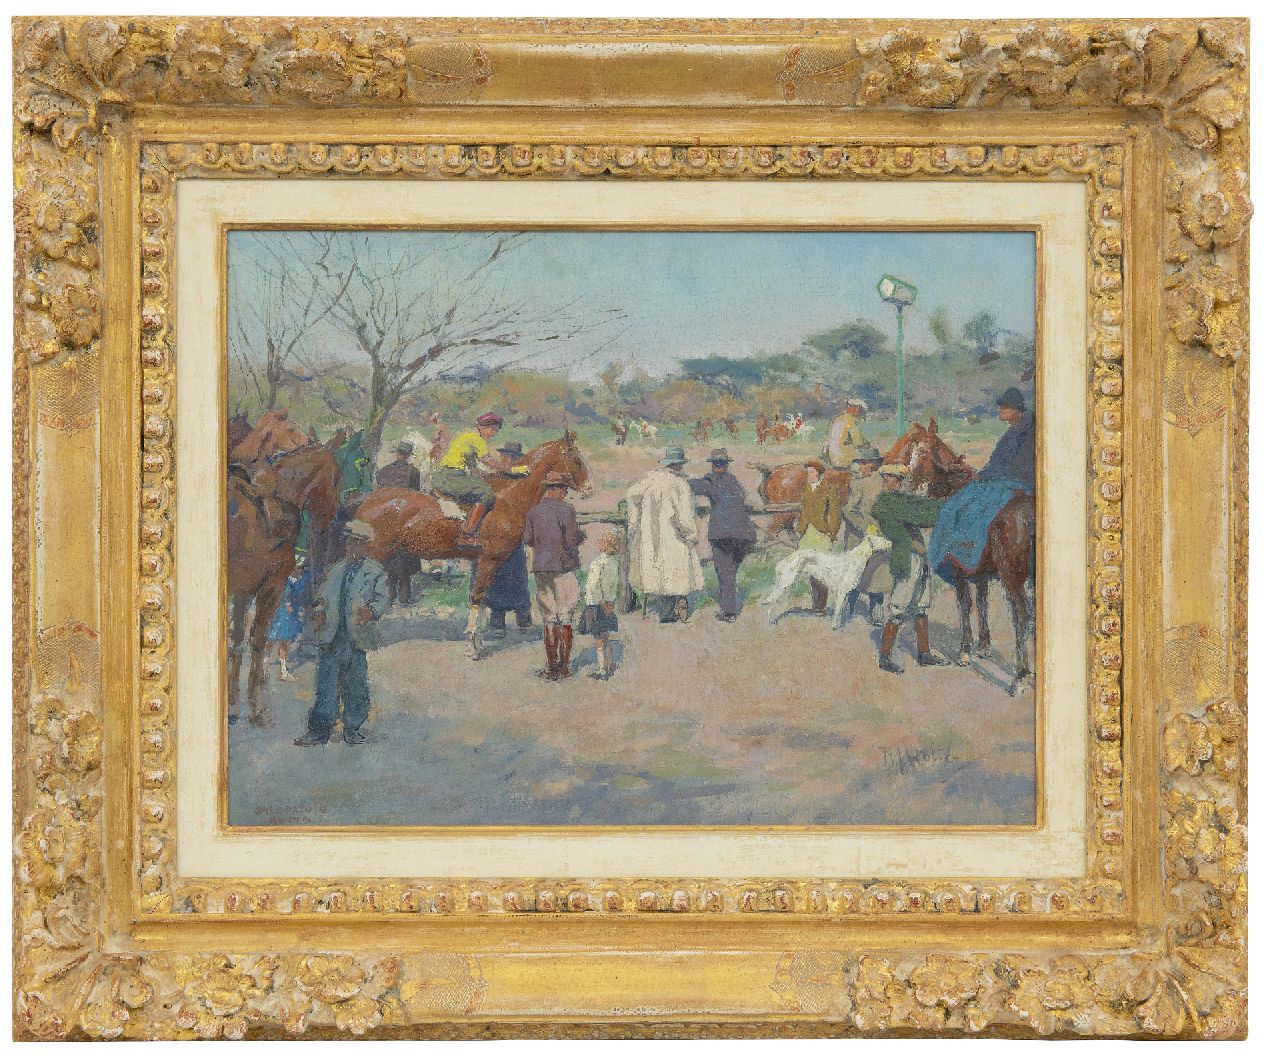 Wolter H.J.  | Hendrik Jan 'Henk' Wolter | Paintings offered for sale | Horseraces on the Galoppatoio, Villa Borghese, Rome, oil on canvas 33.7 x 44.6 cm, signed l.r. and painted ca. 1938-1940